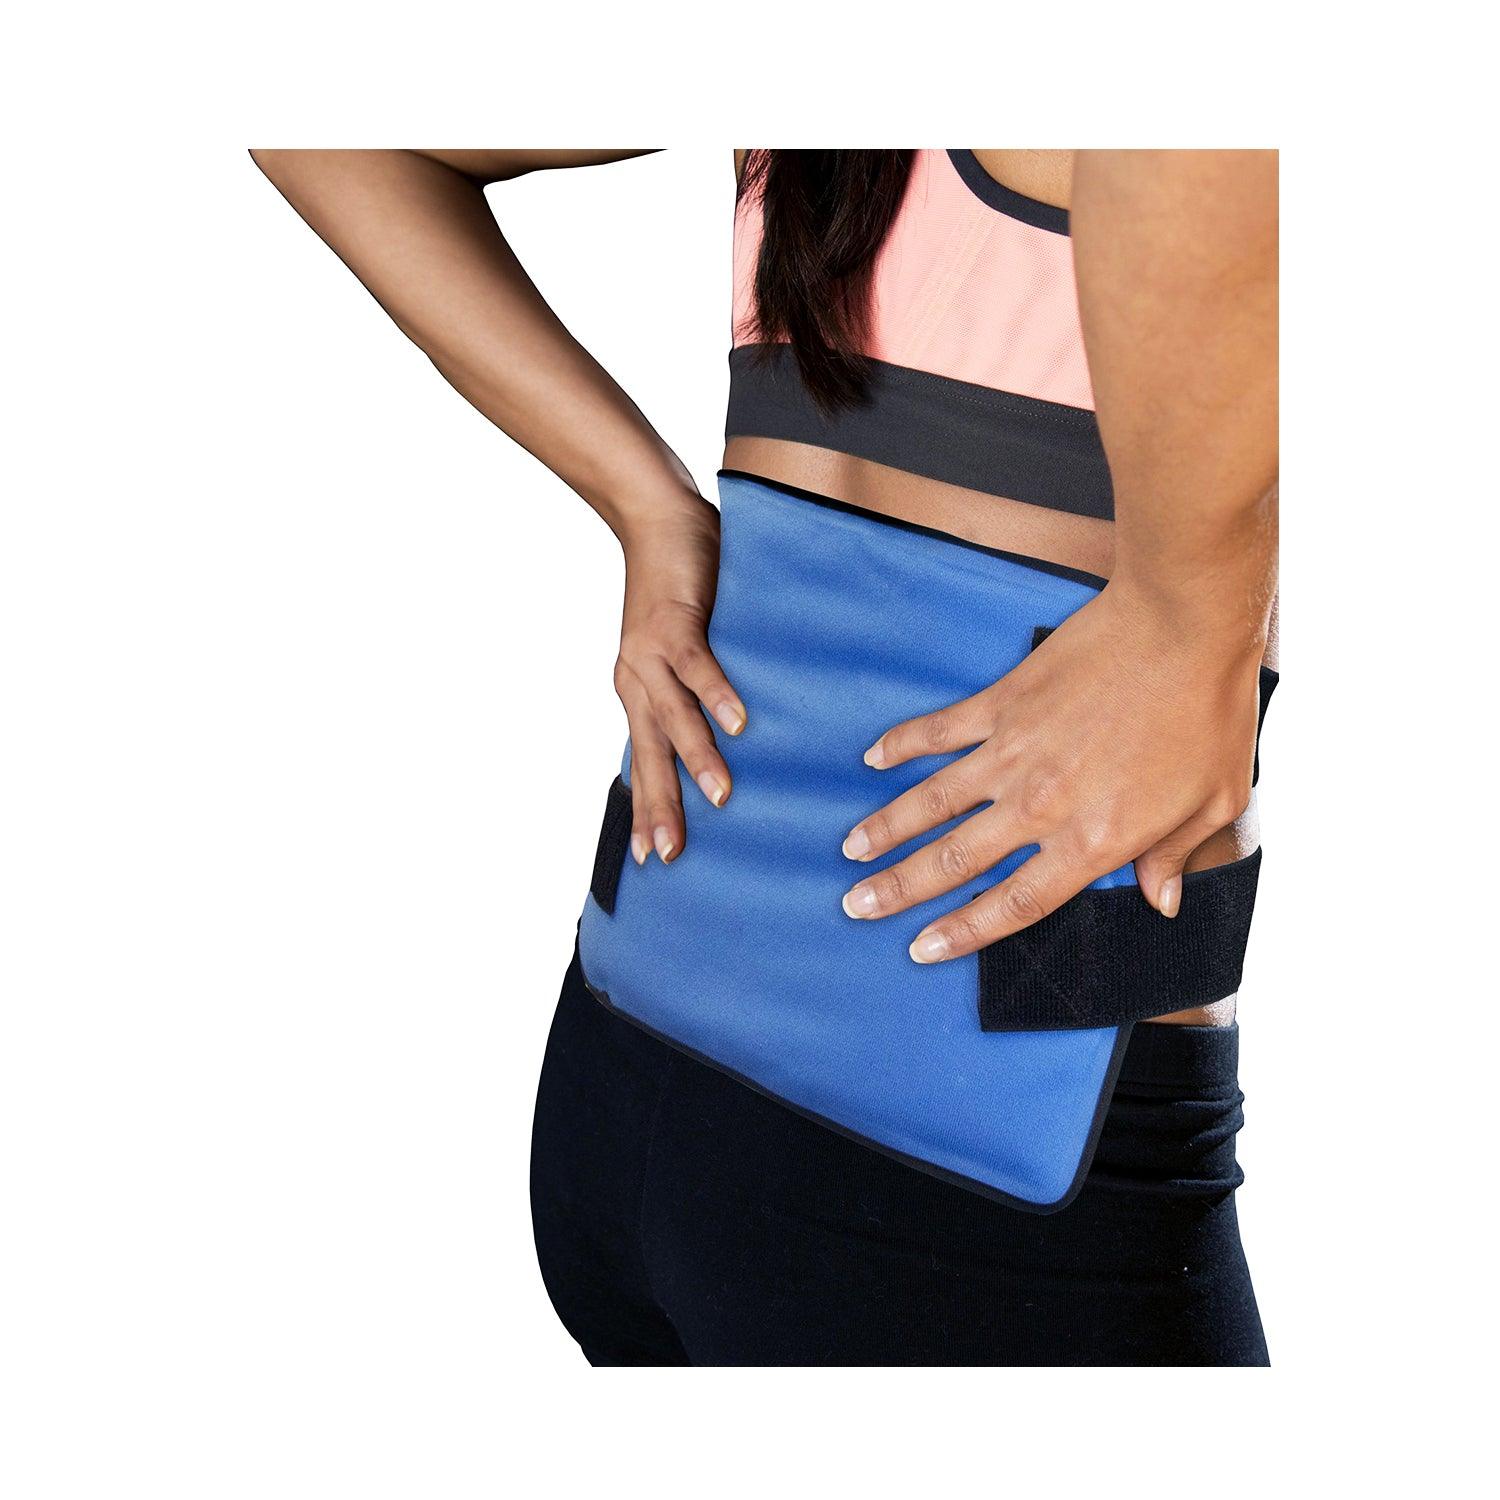 FlexiKold Gel Cold Pack with Strap lower back